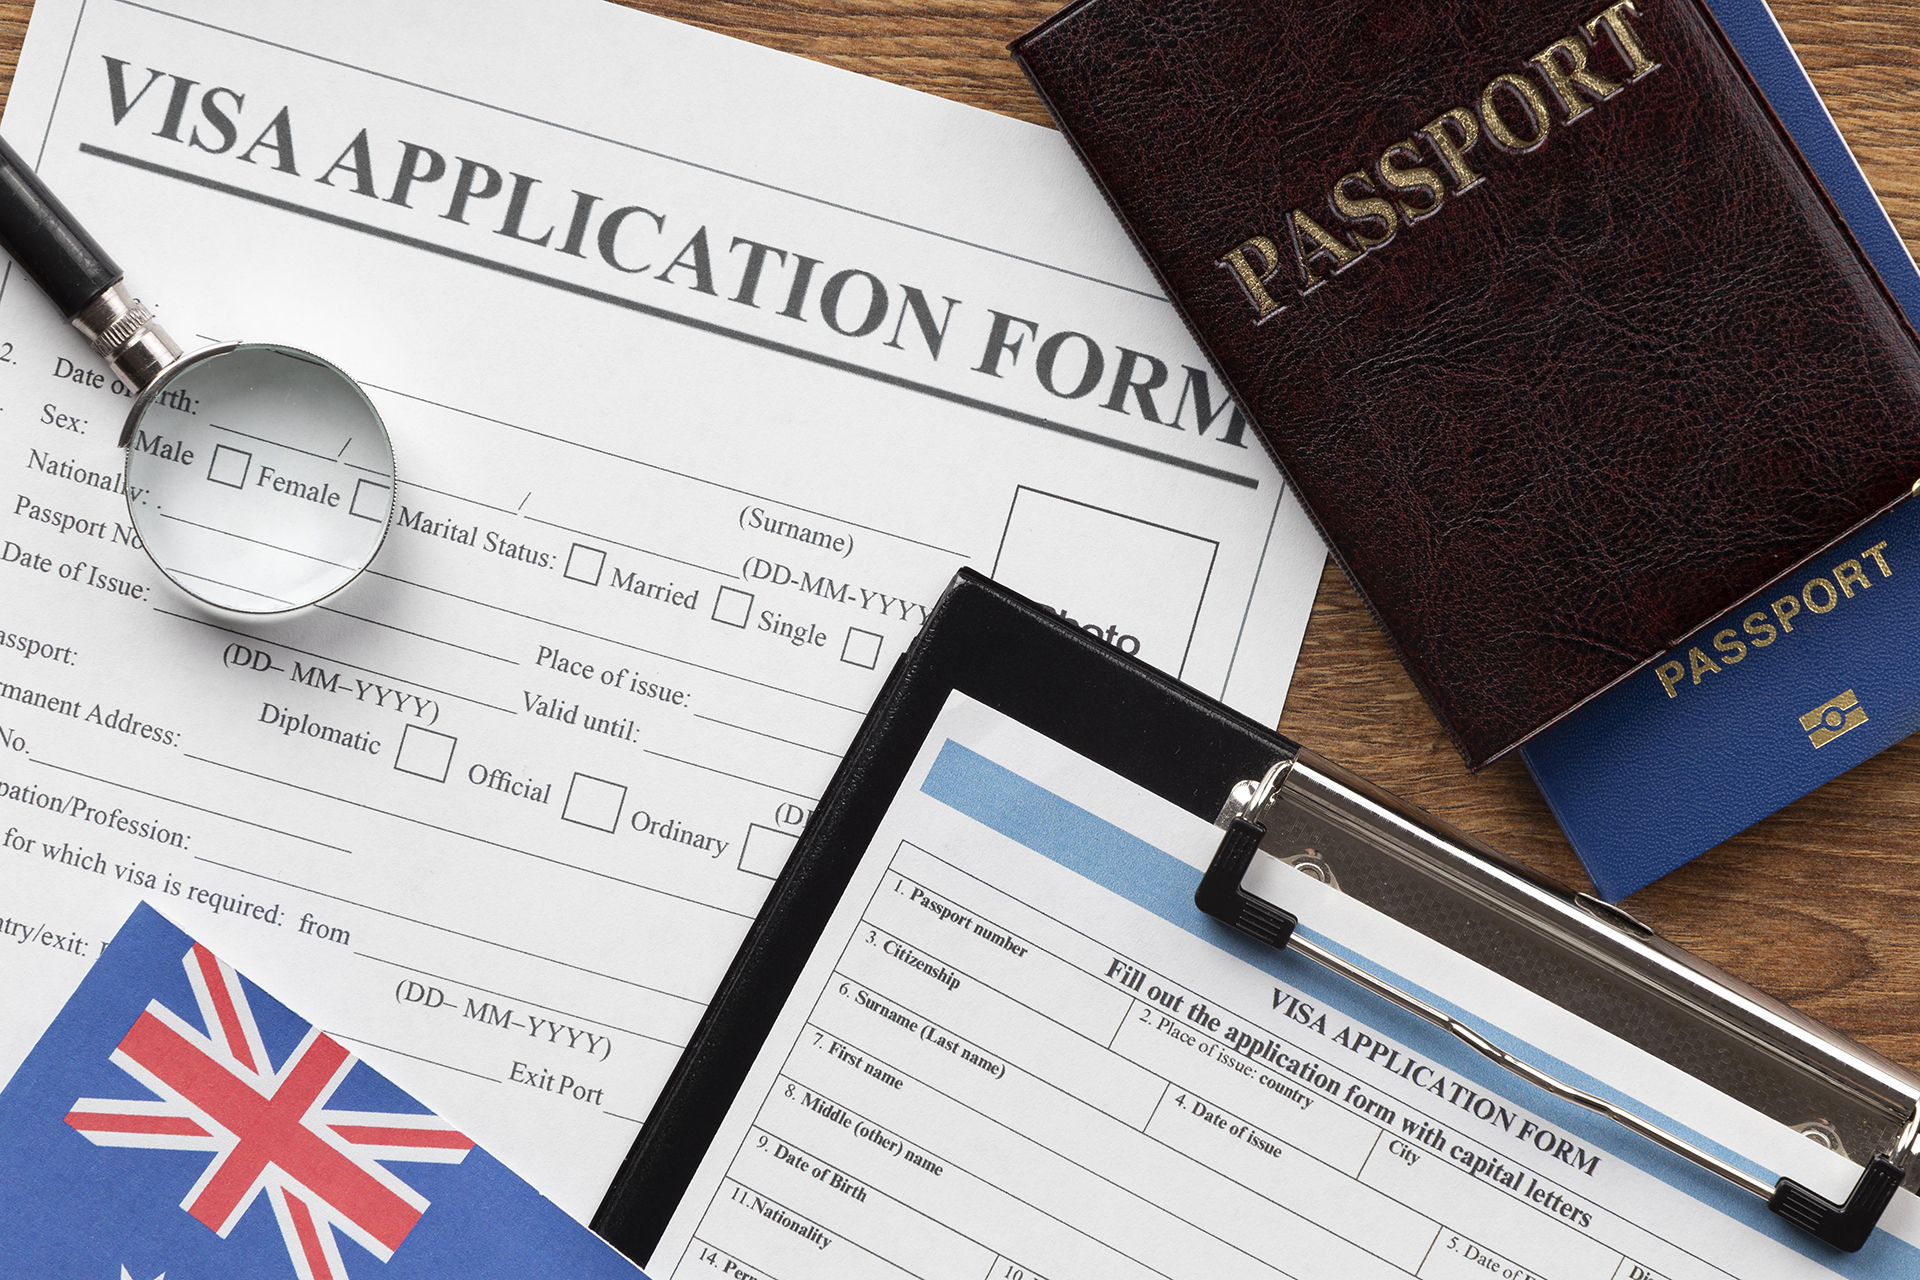 A step-by-step guide to getting the Australian Student Visa for International Students